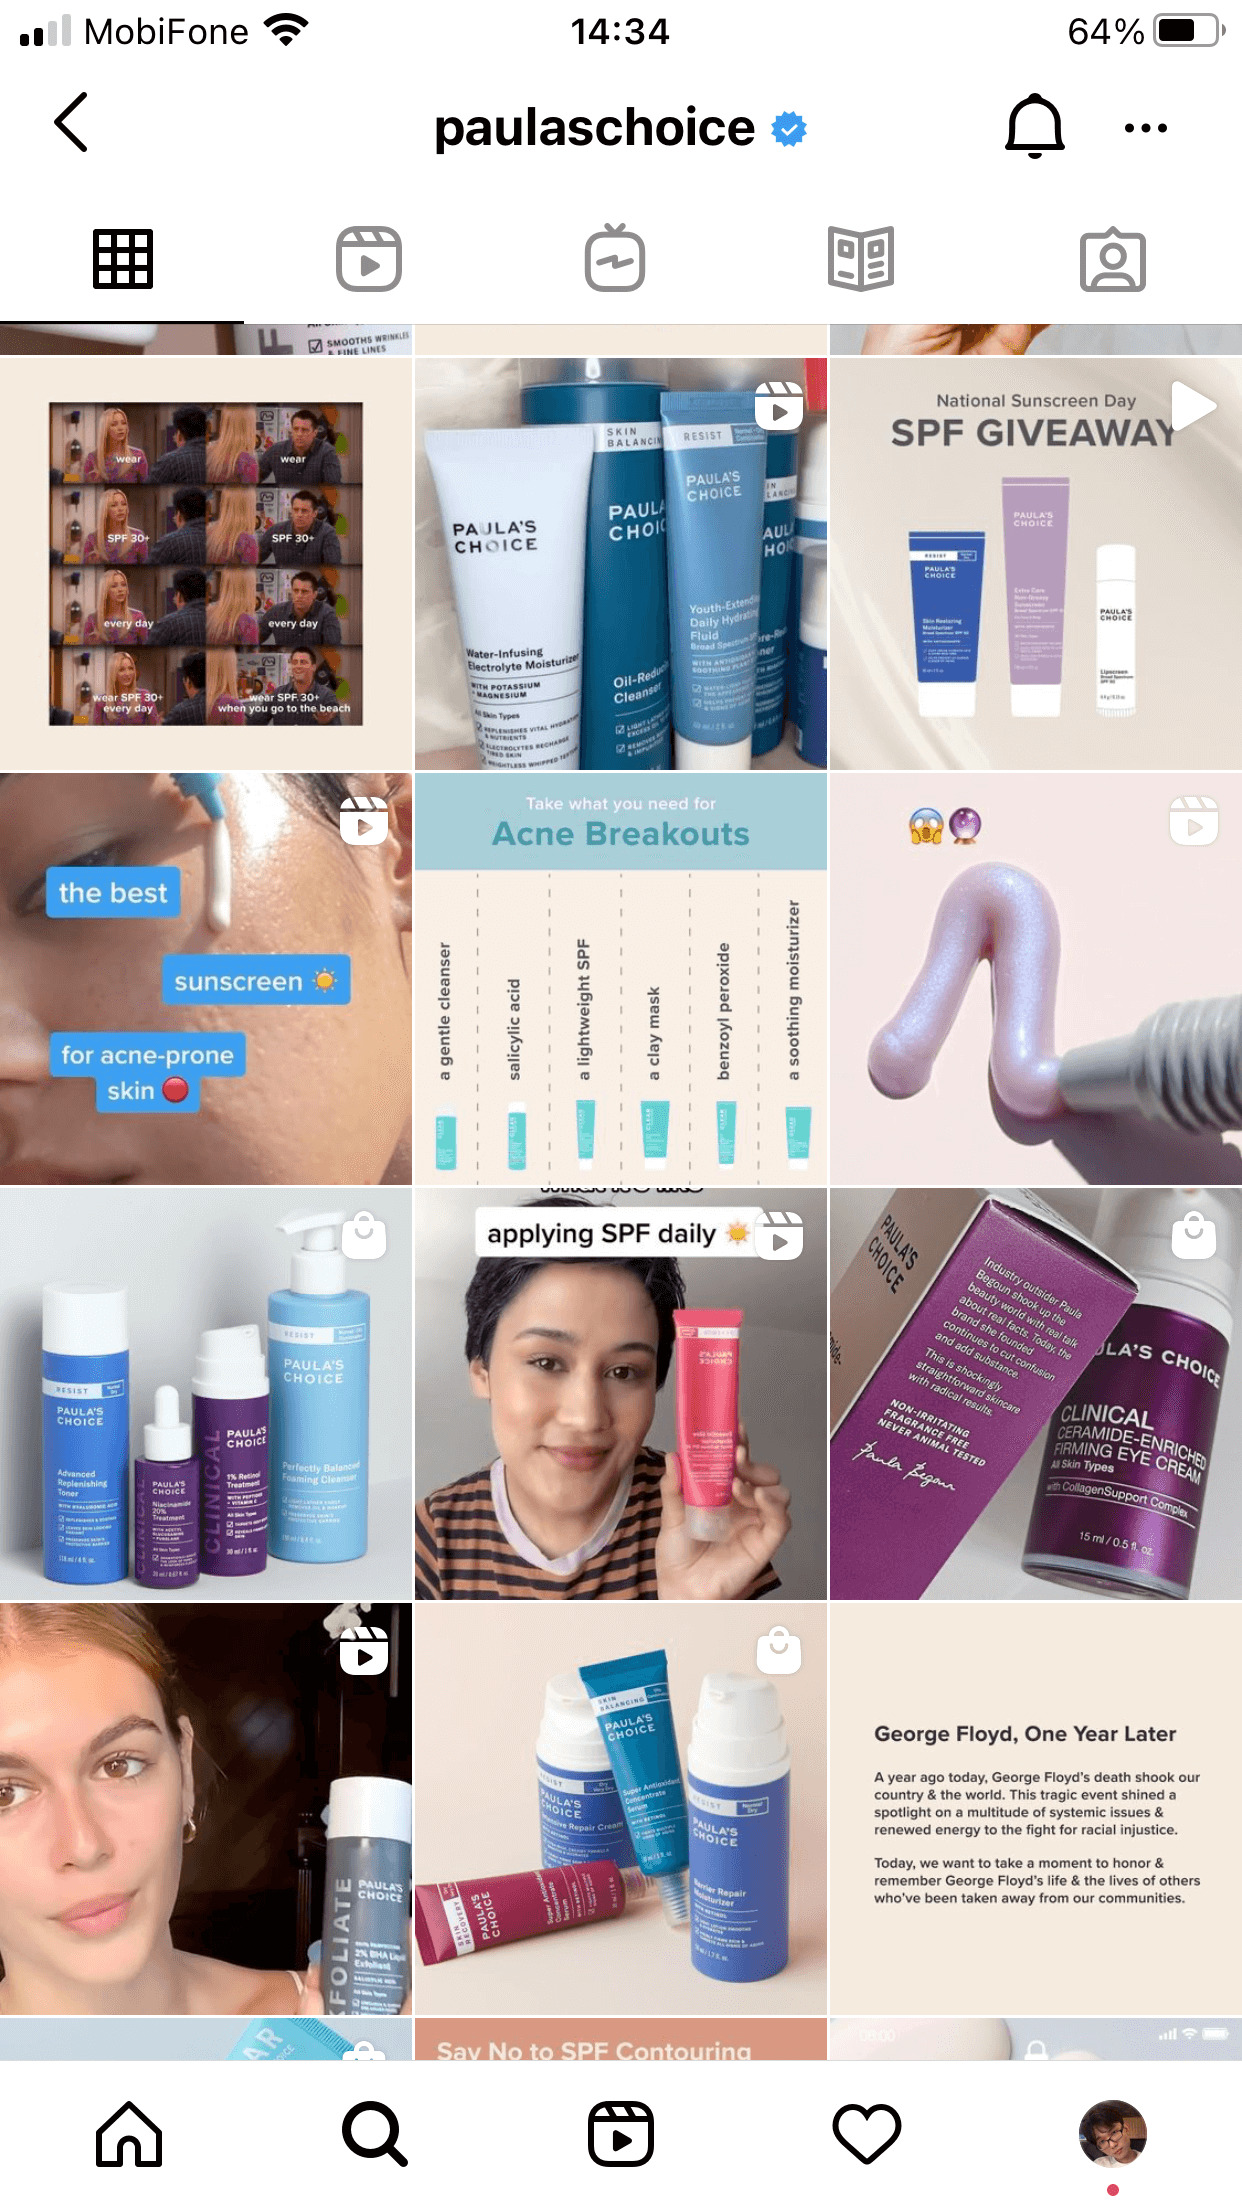 Paula's Choice usually uses these short videos to give audience a sneak peek of their products